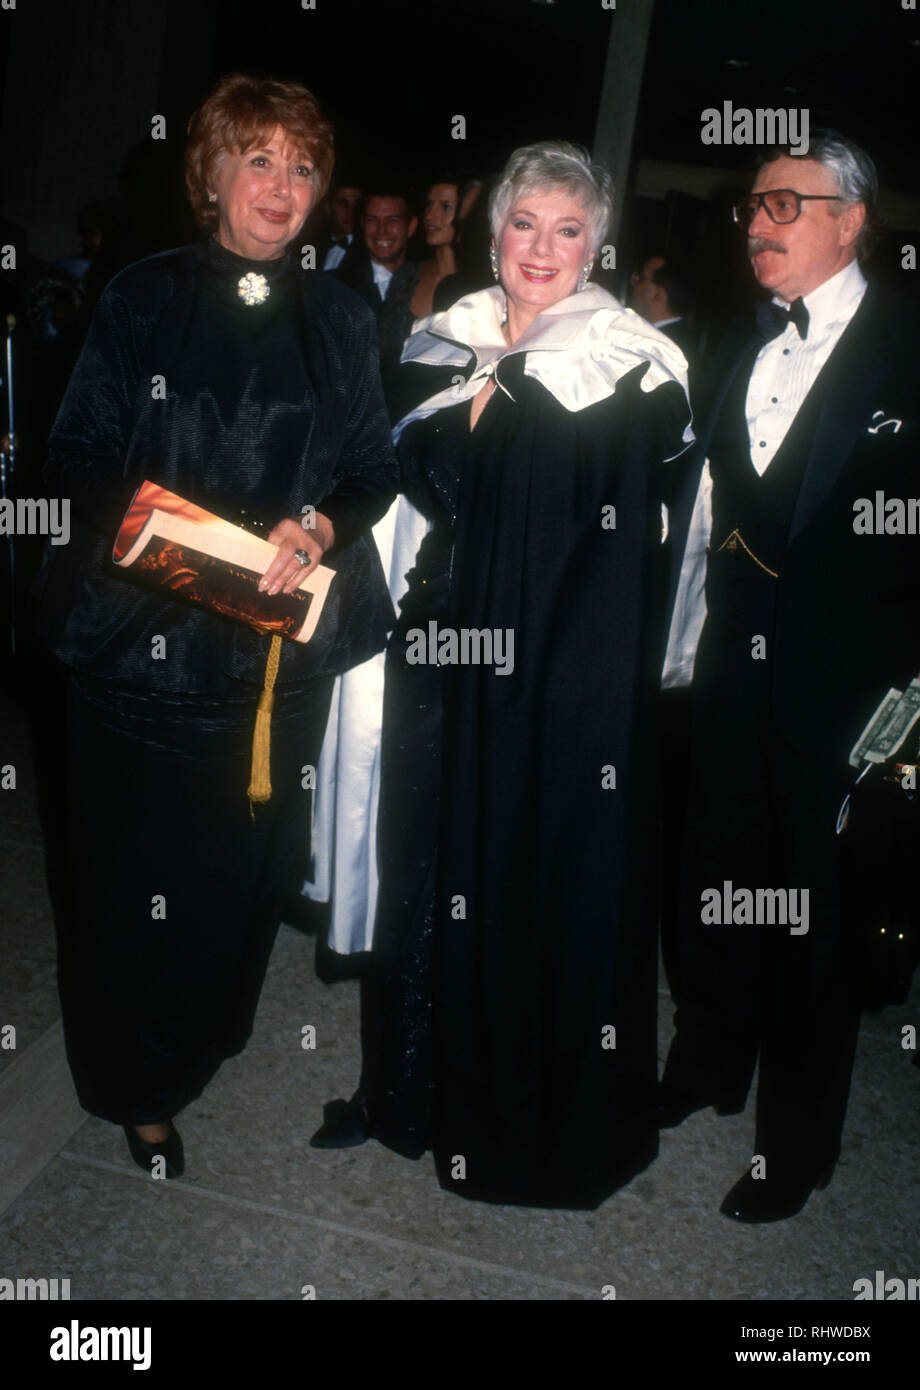 CENTURY CITY, CA - DECEMBER 9: American Operatic soprano Beverly Sills, actress Shirley Jones and comedian Marty Ingels attend the opening night of 'Sunset Blvd' on December 9, 1993 at the Shubert Theater in Century City, California. Photo by Barry King/Alamy Stock Photo Stock Photo